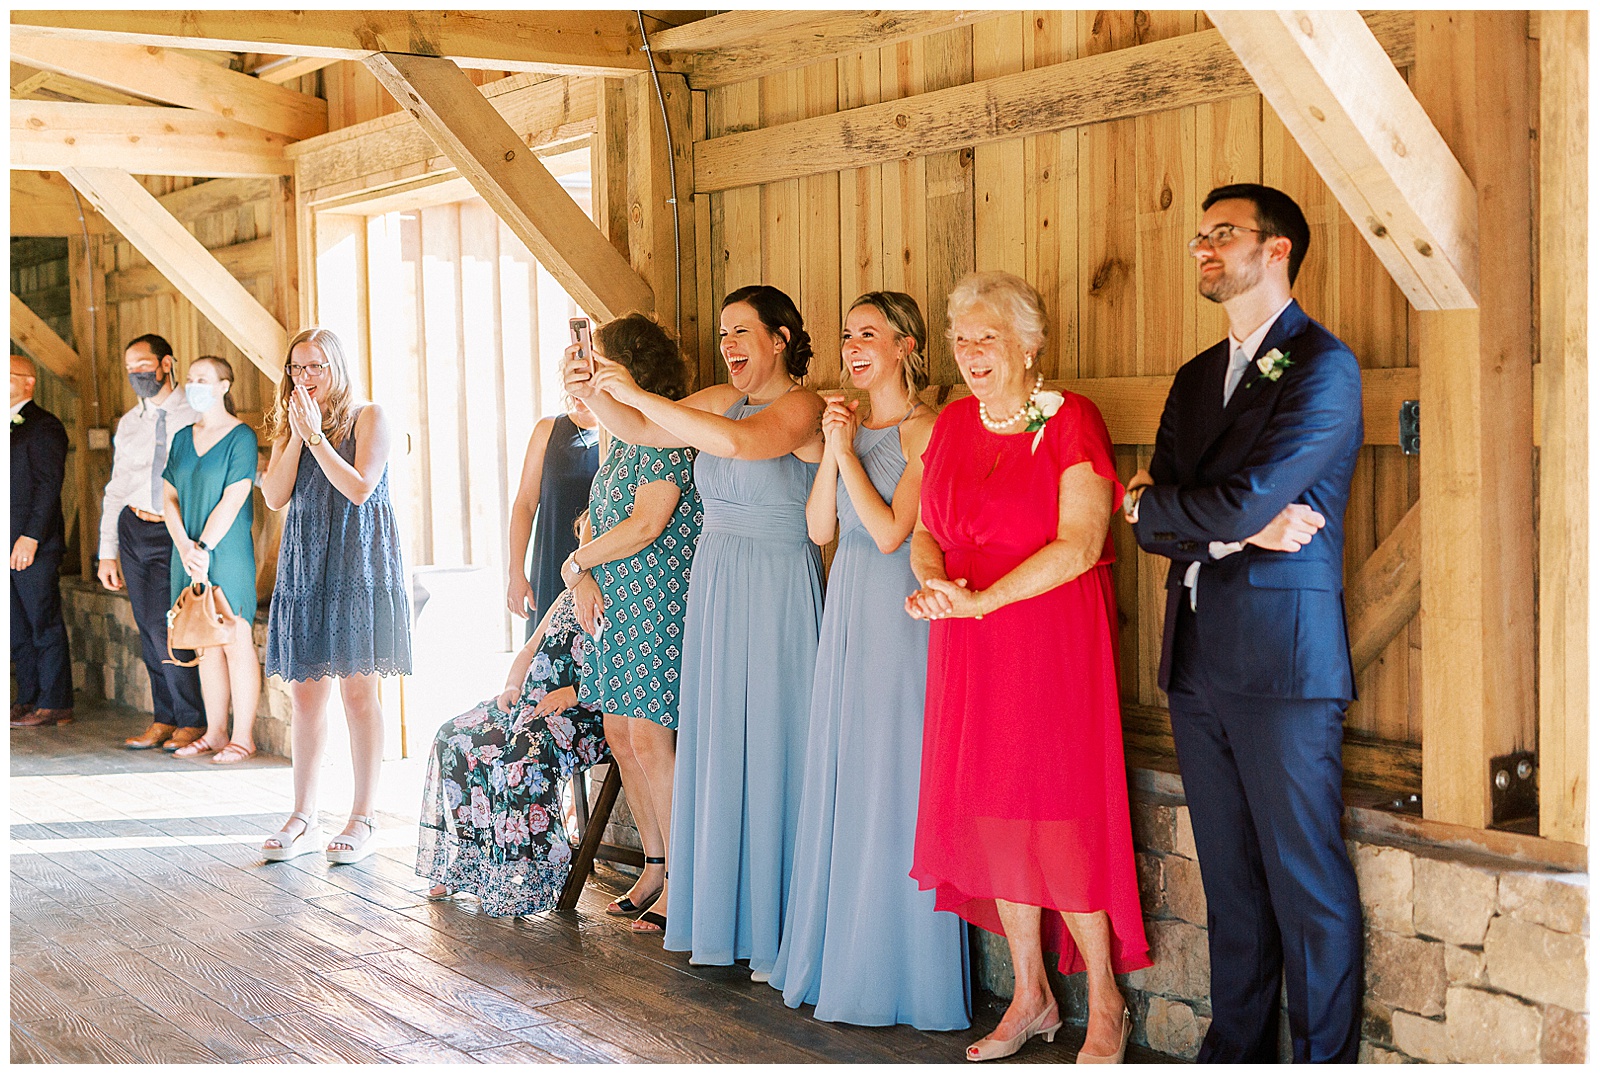 guests clap for groom performs hilarious surprise song for bride in wooden open barn wedding venue